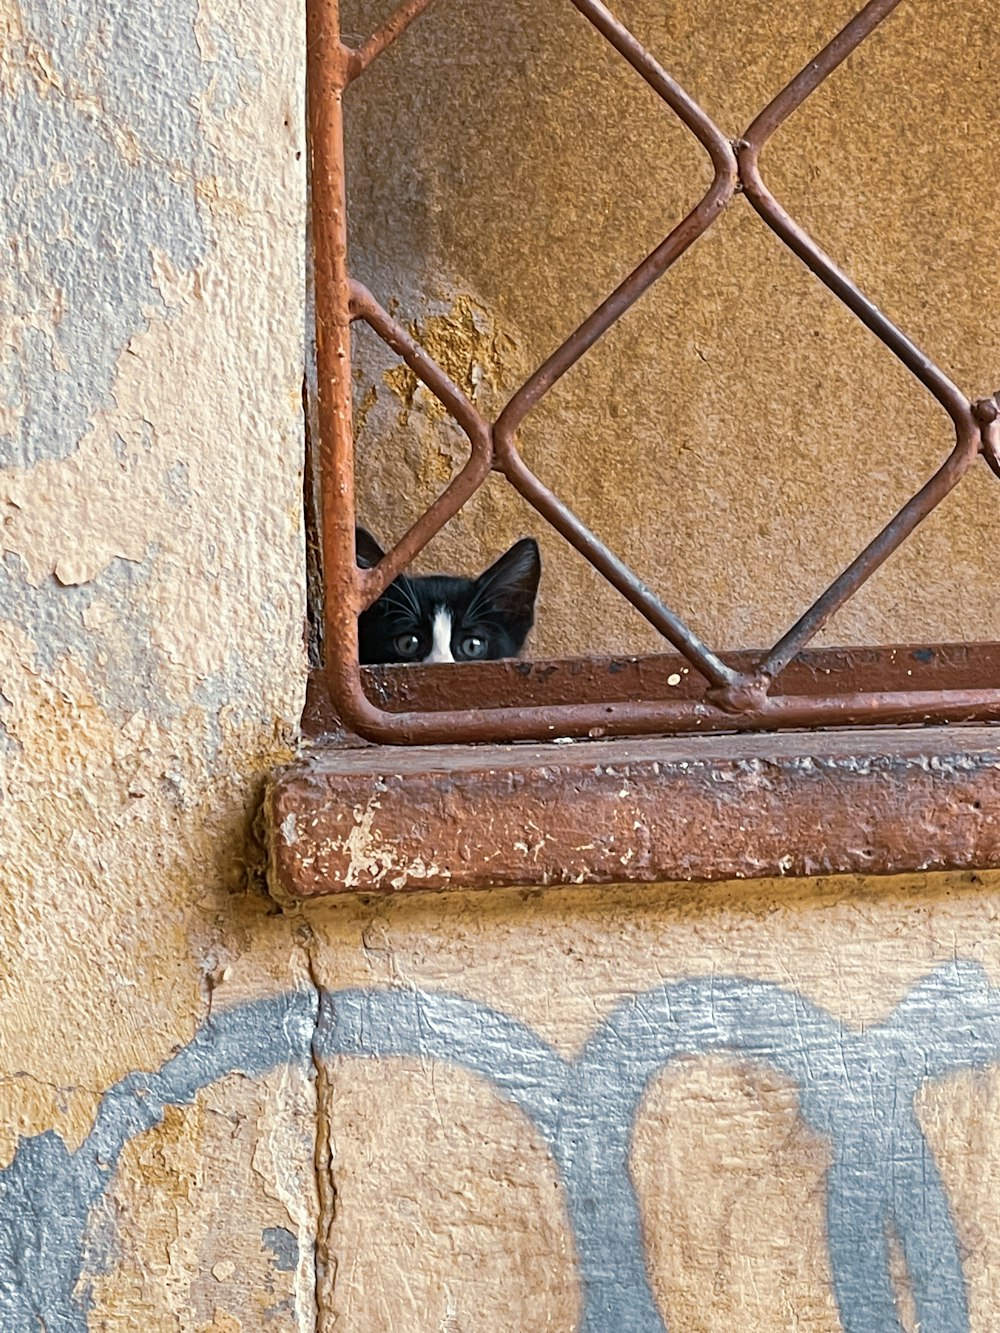 a black and white cat peeking out of a window